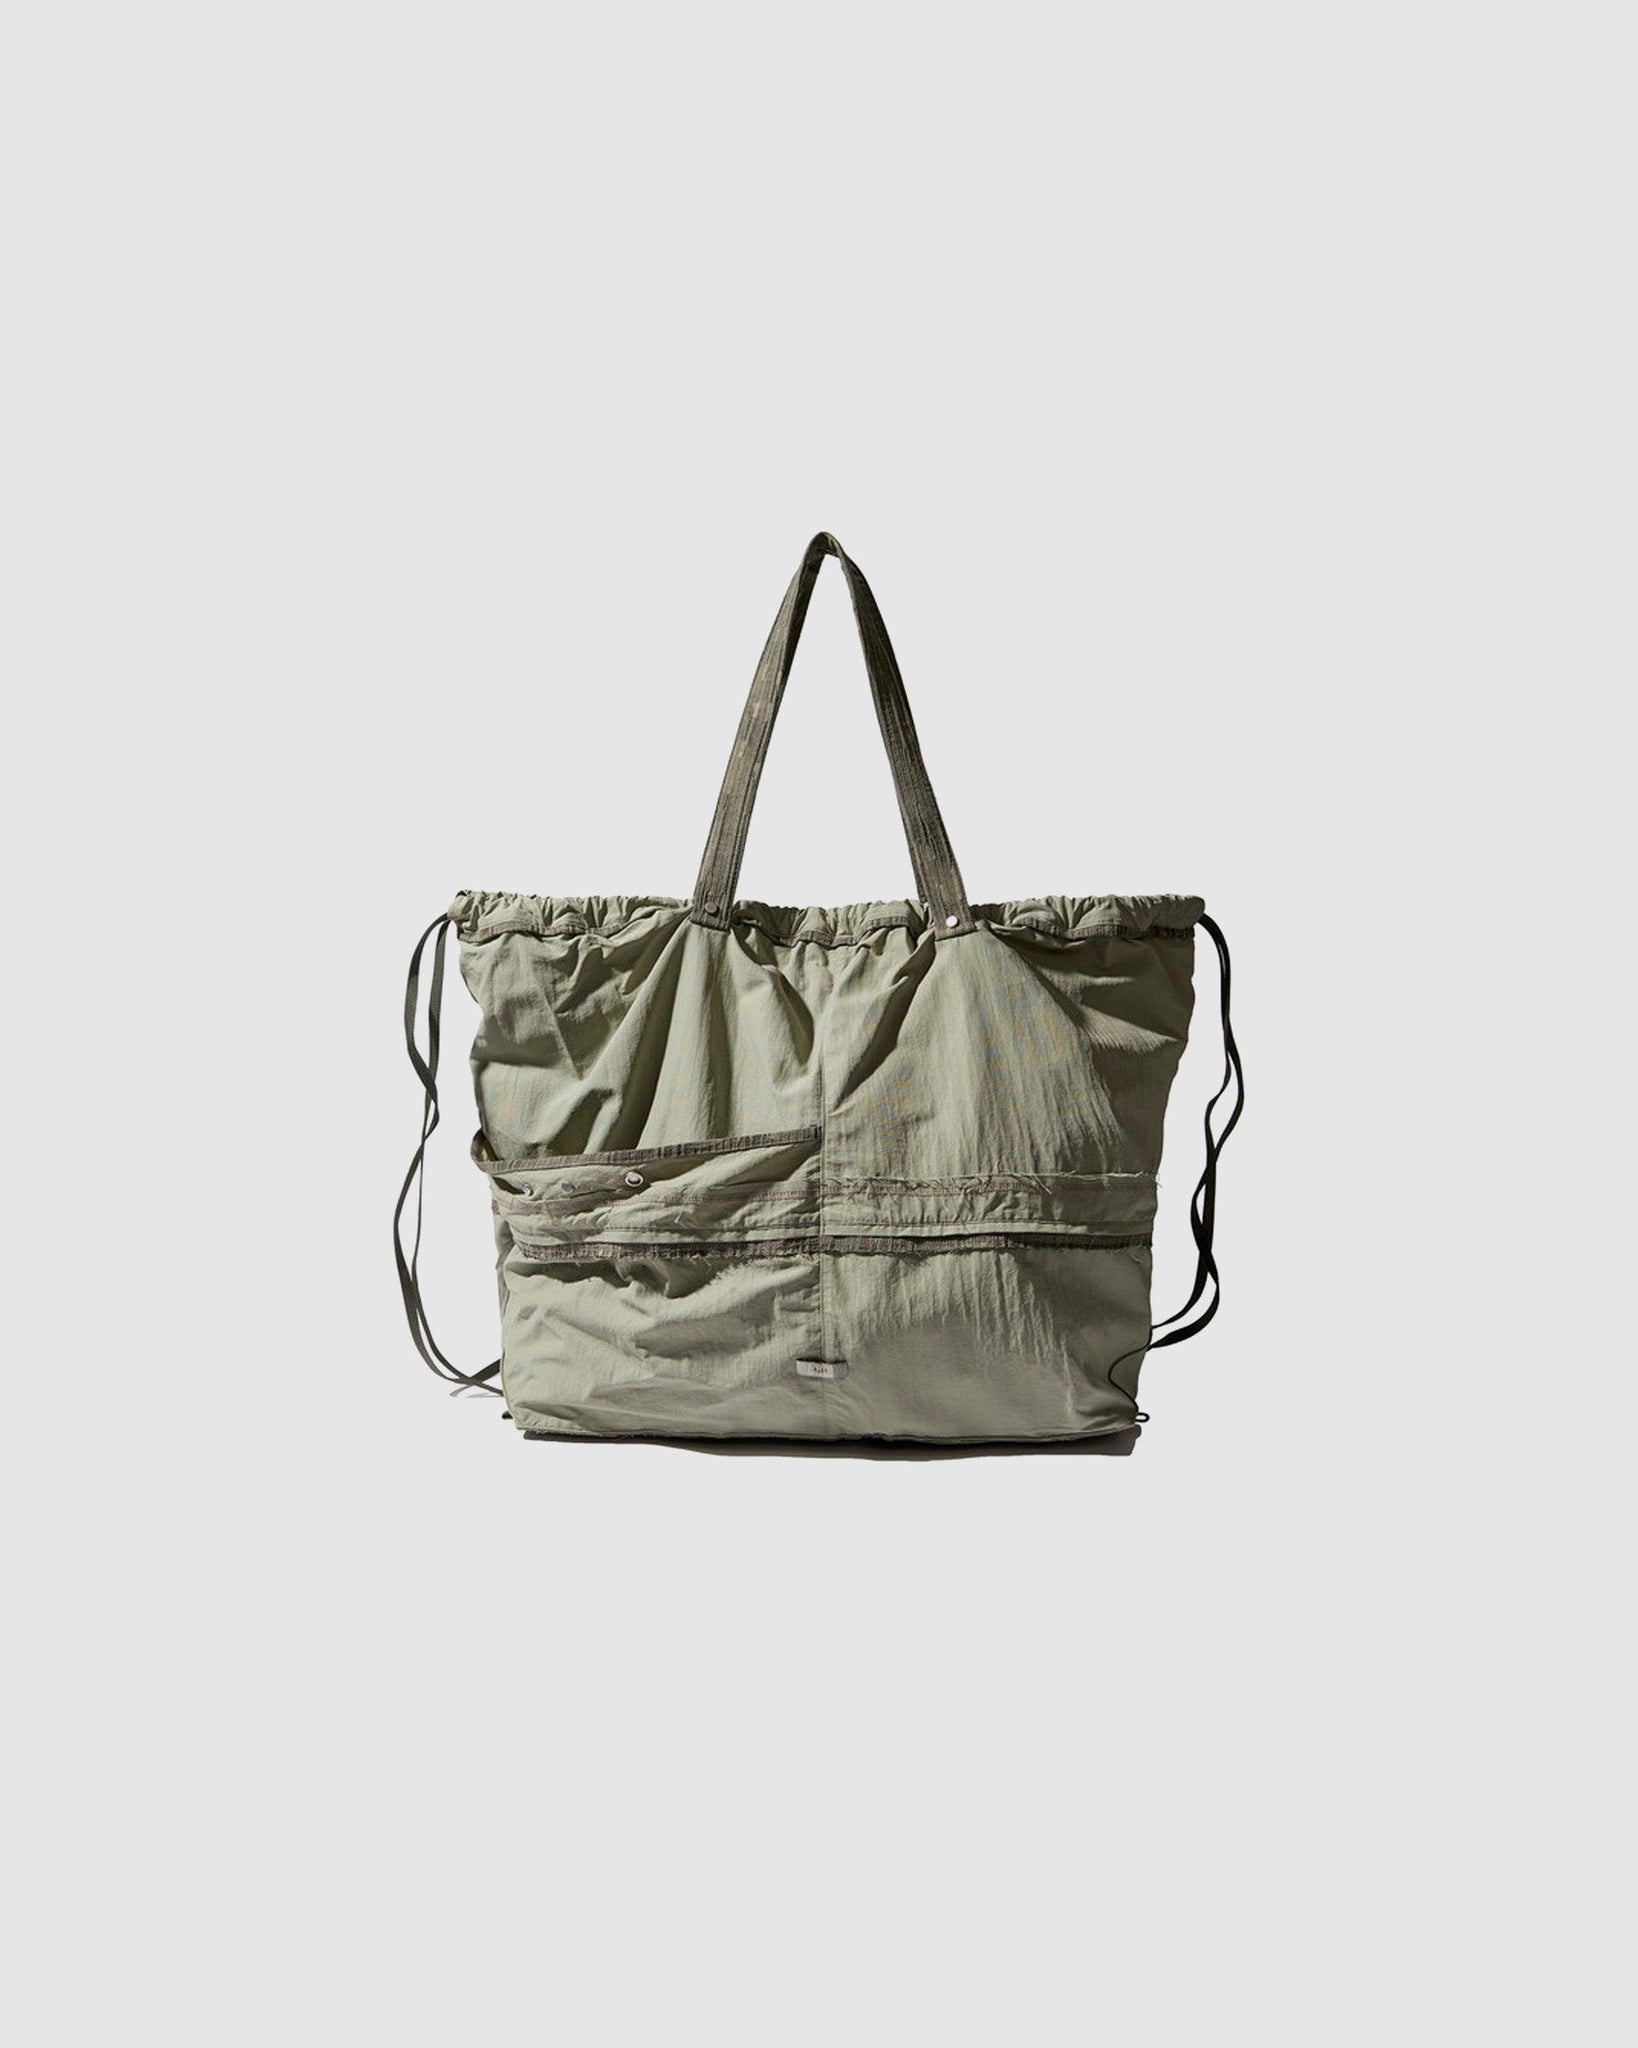 02 Bag Khaki - {{ collection.title }} - Chinatown Country Club 